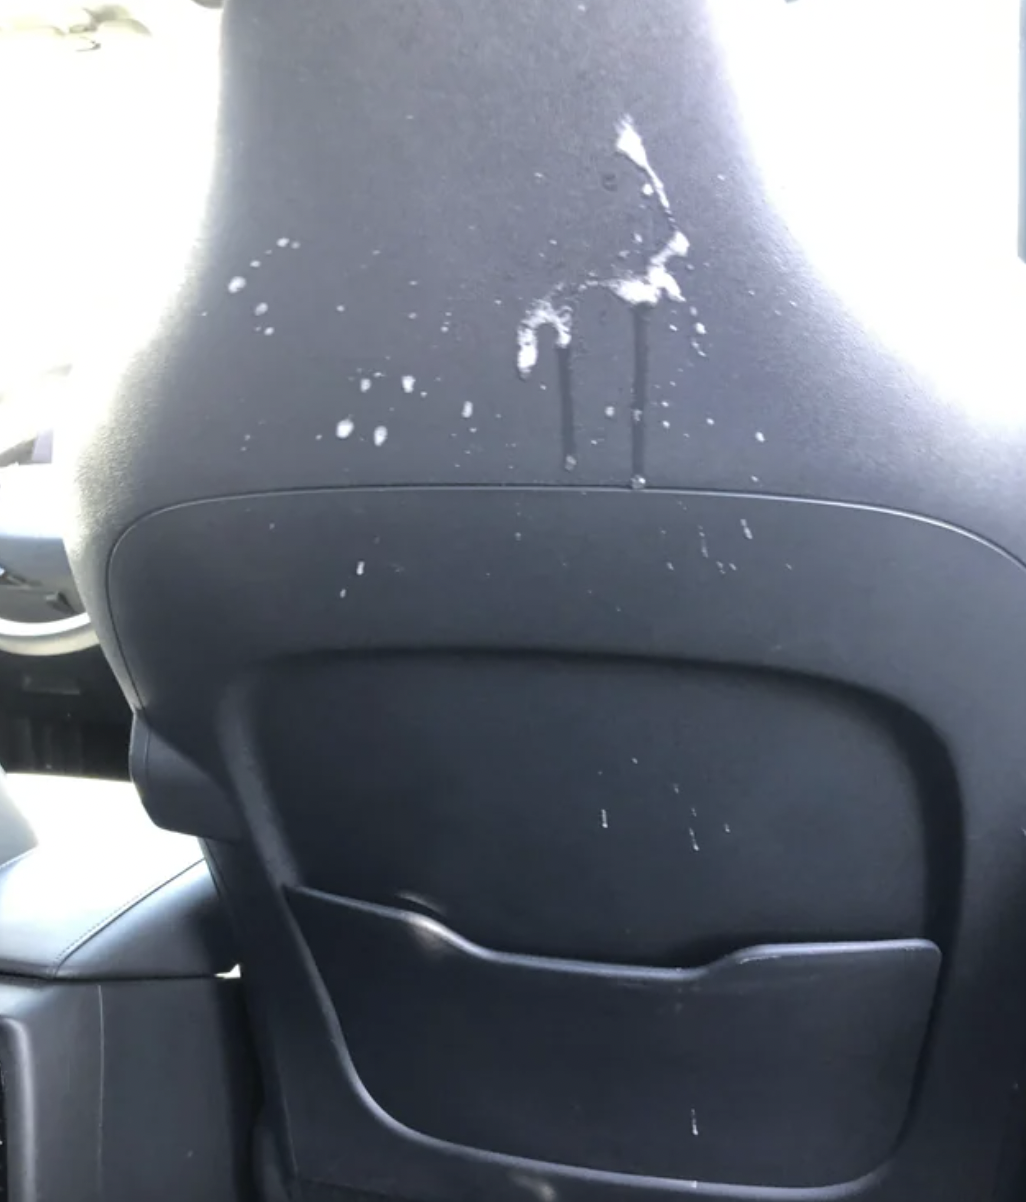 “The last ride of the day added stops last minute, and I said no I would be ending the ride at the first stop so she is SCREAMING at me in the back seat, threatening me, so I pull over and tell her to get out and she SPITS ALL OVER MY SEAT. What kind of trash person does that?!”